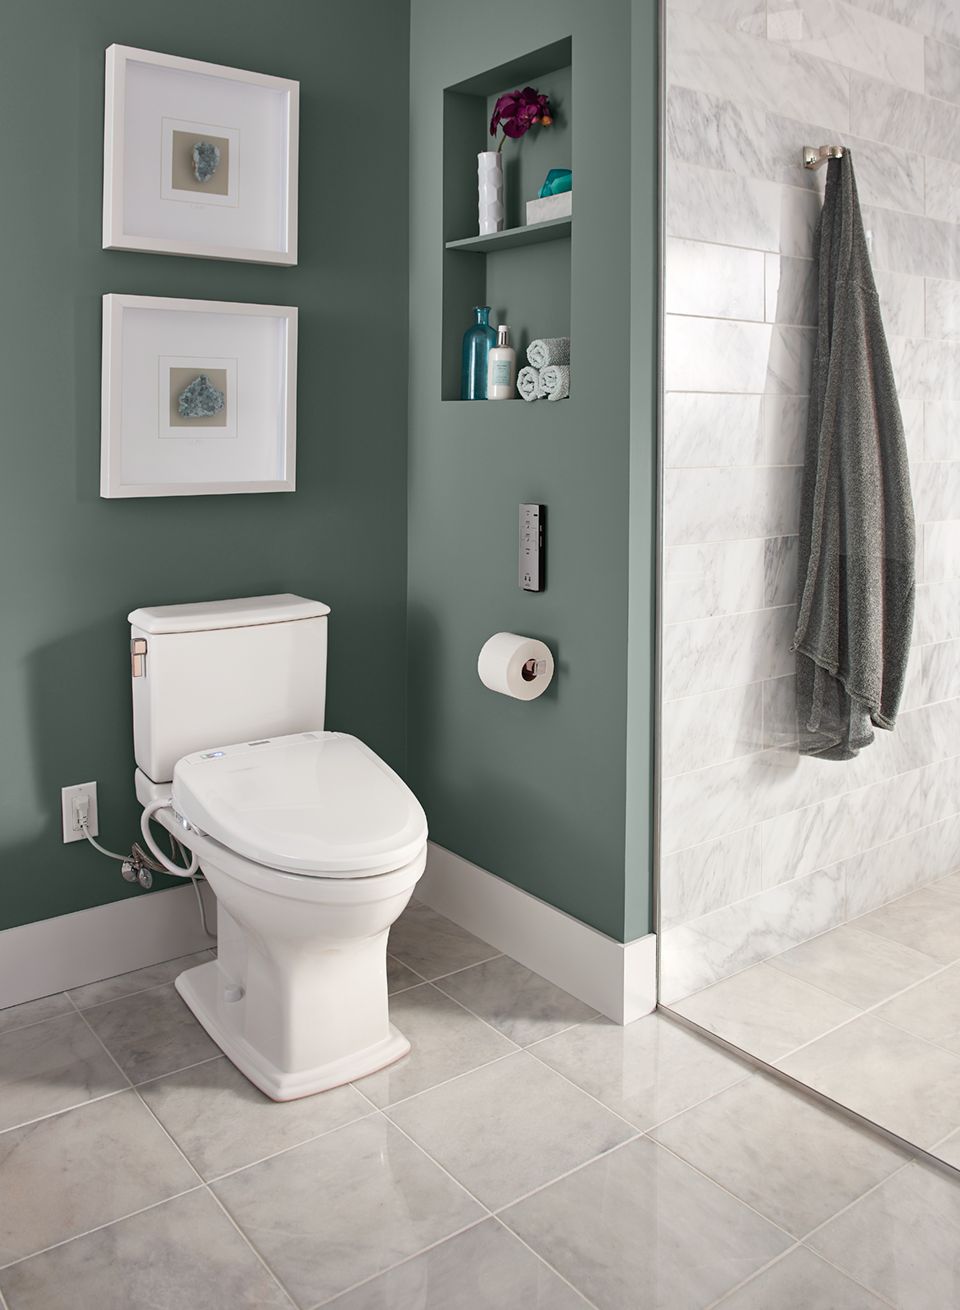 Connelly Two-Piece Toilet by Toto, Universal Height (ADA), Elongated Bowl, Dual Flush, with Washlet®+ Bidet Capability  MS494124CEMFG#01